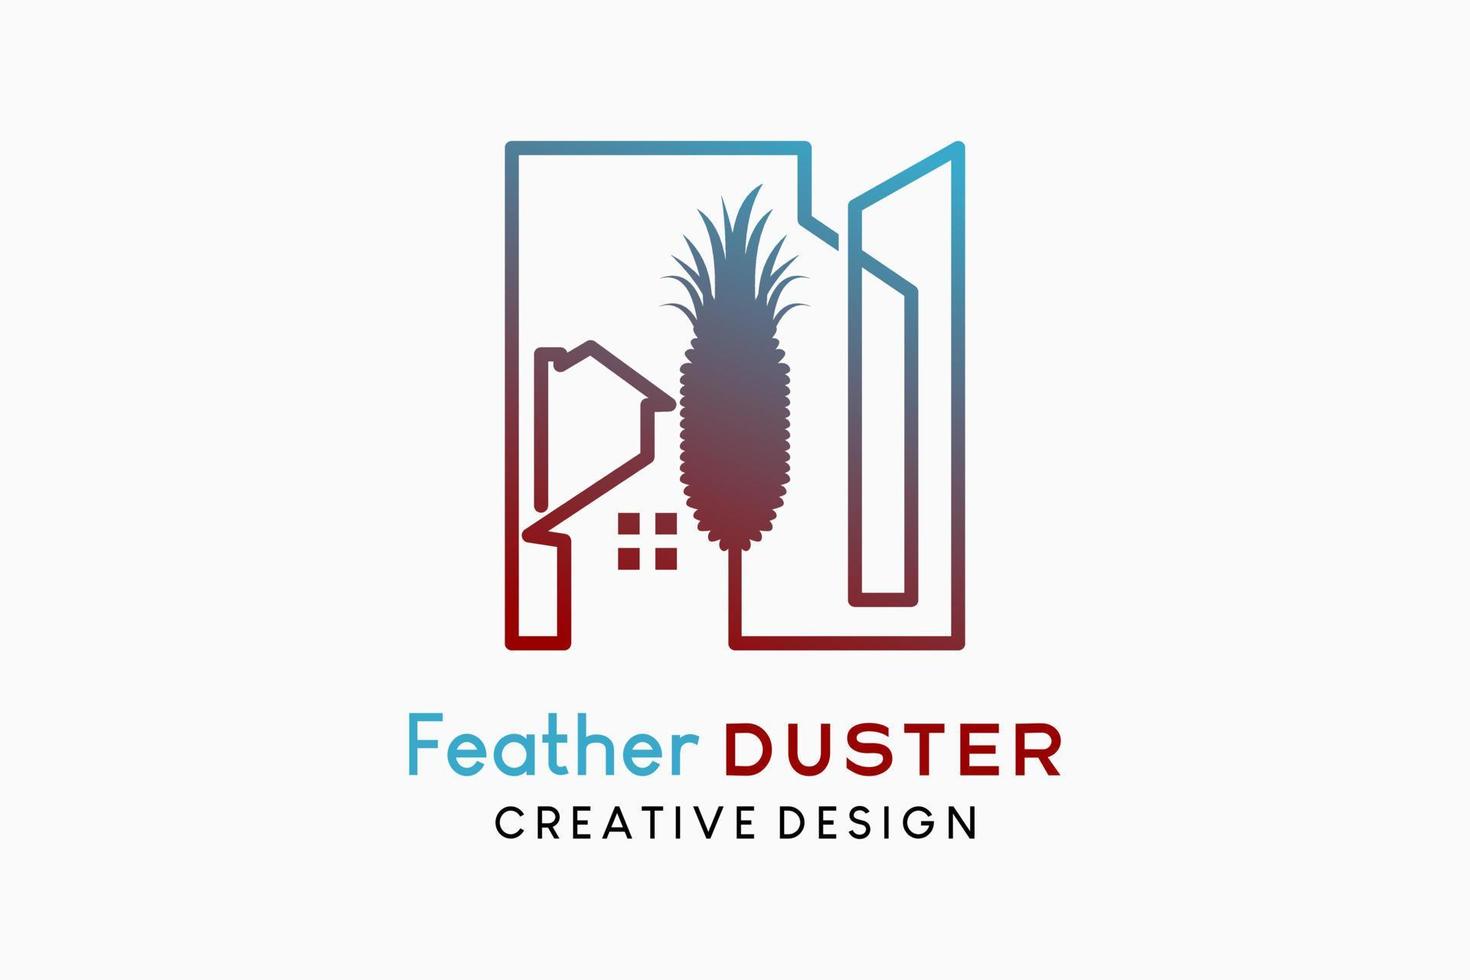 Quill feather duster logo design traditional dust cleaner illustration, silhouette of a feather feather duster combined with house and building icons in line art vector